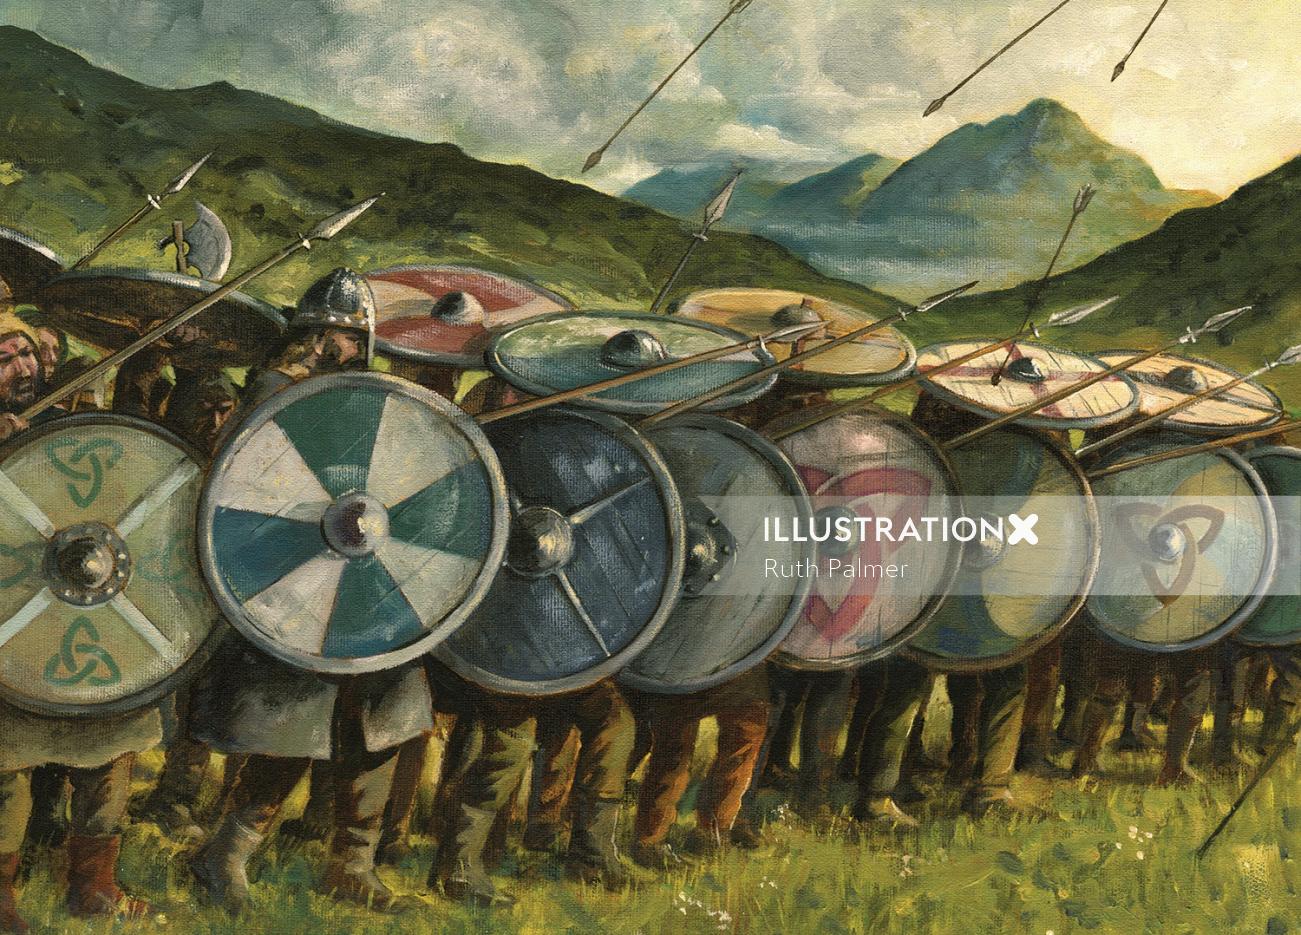 Painting art of middle Ages Armor with shield